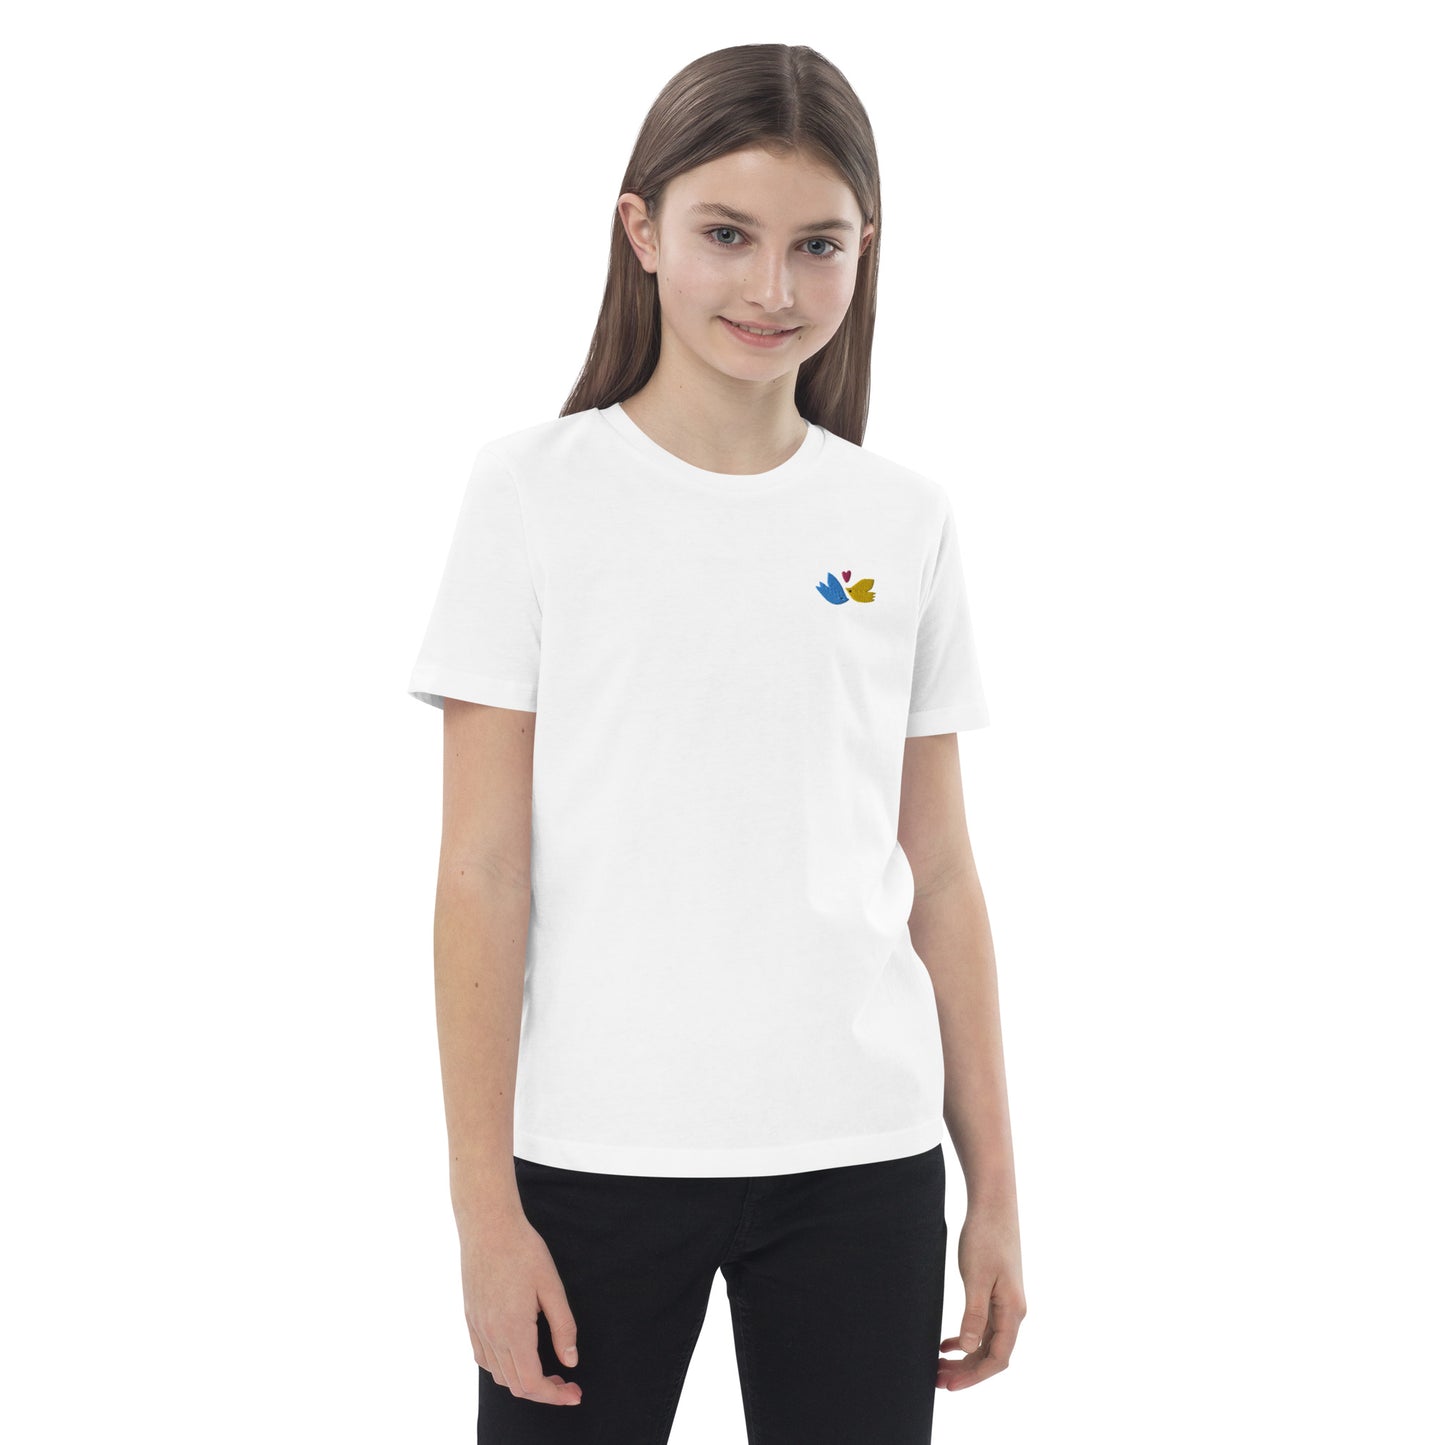 Birds organic embroidered cotton kids t-shirt in white 3-14 yrs